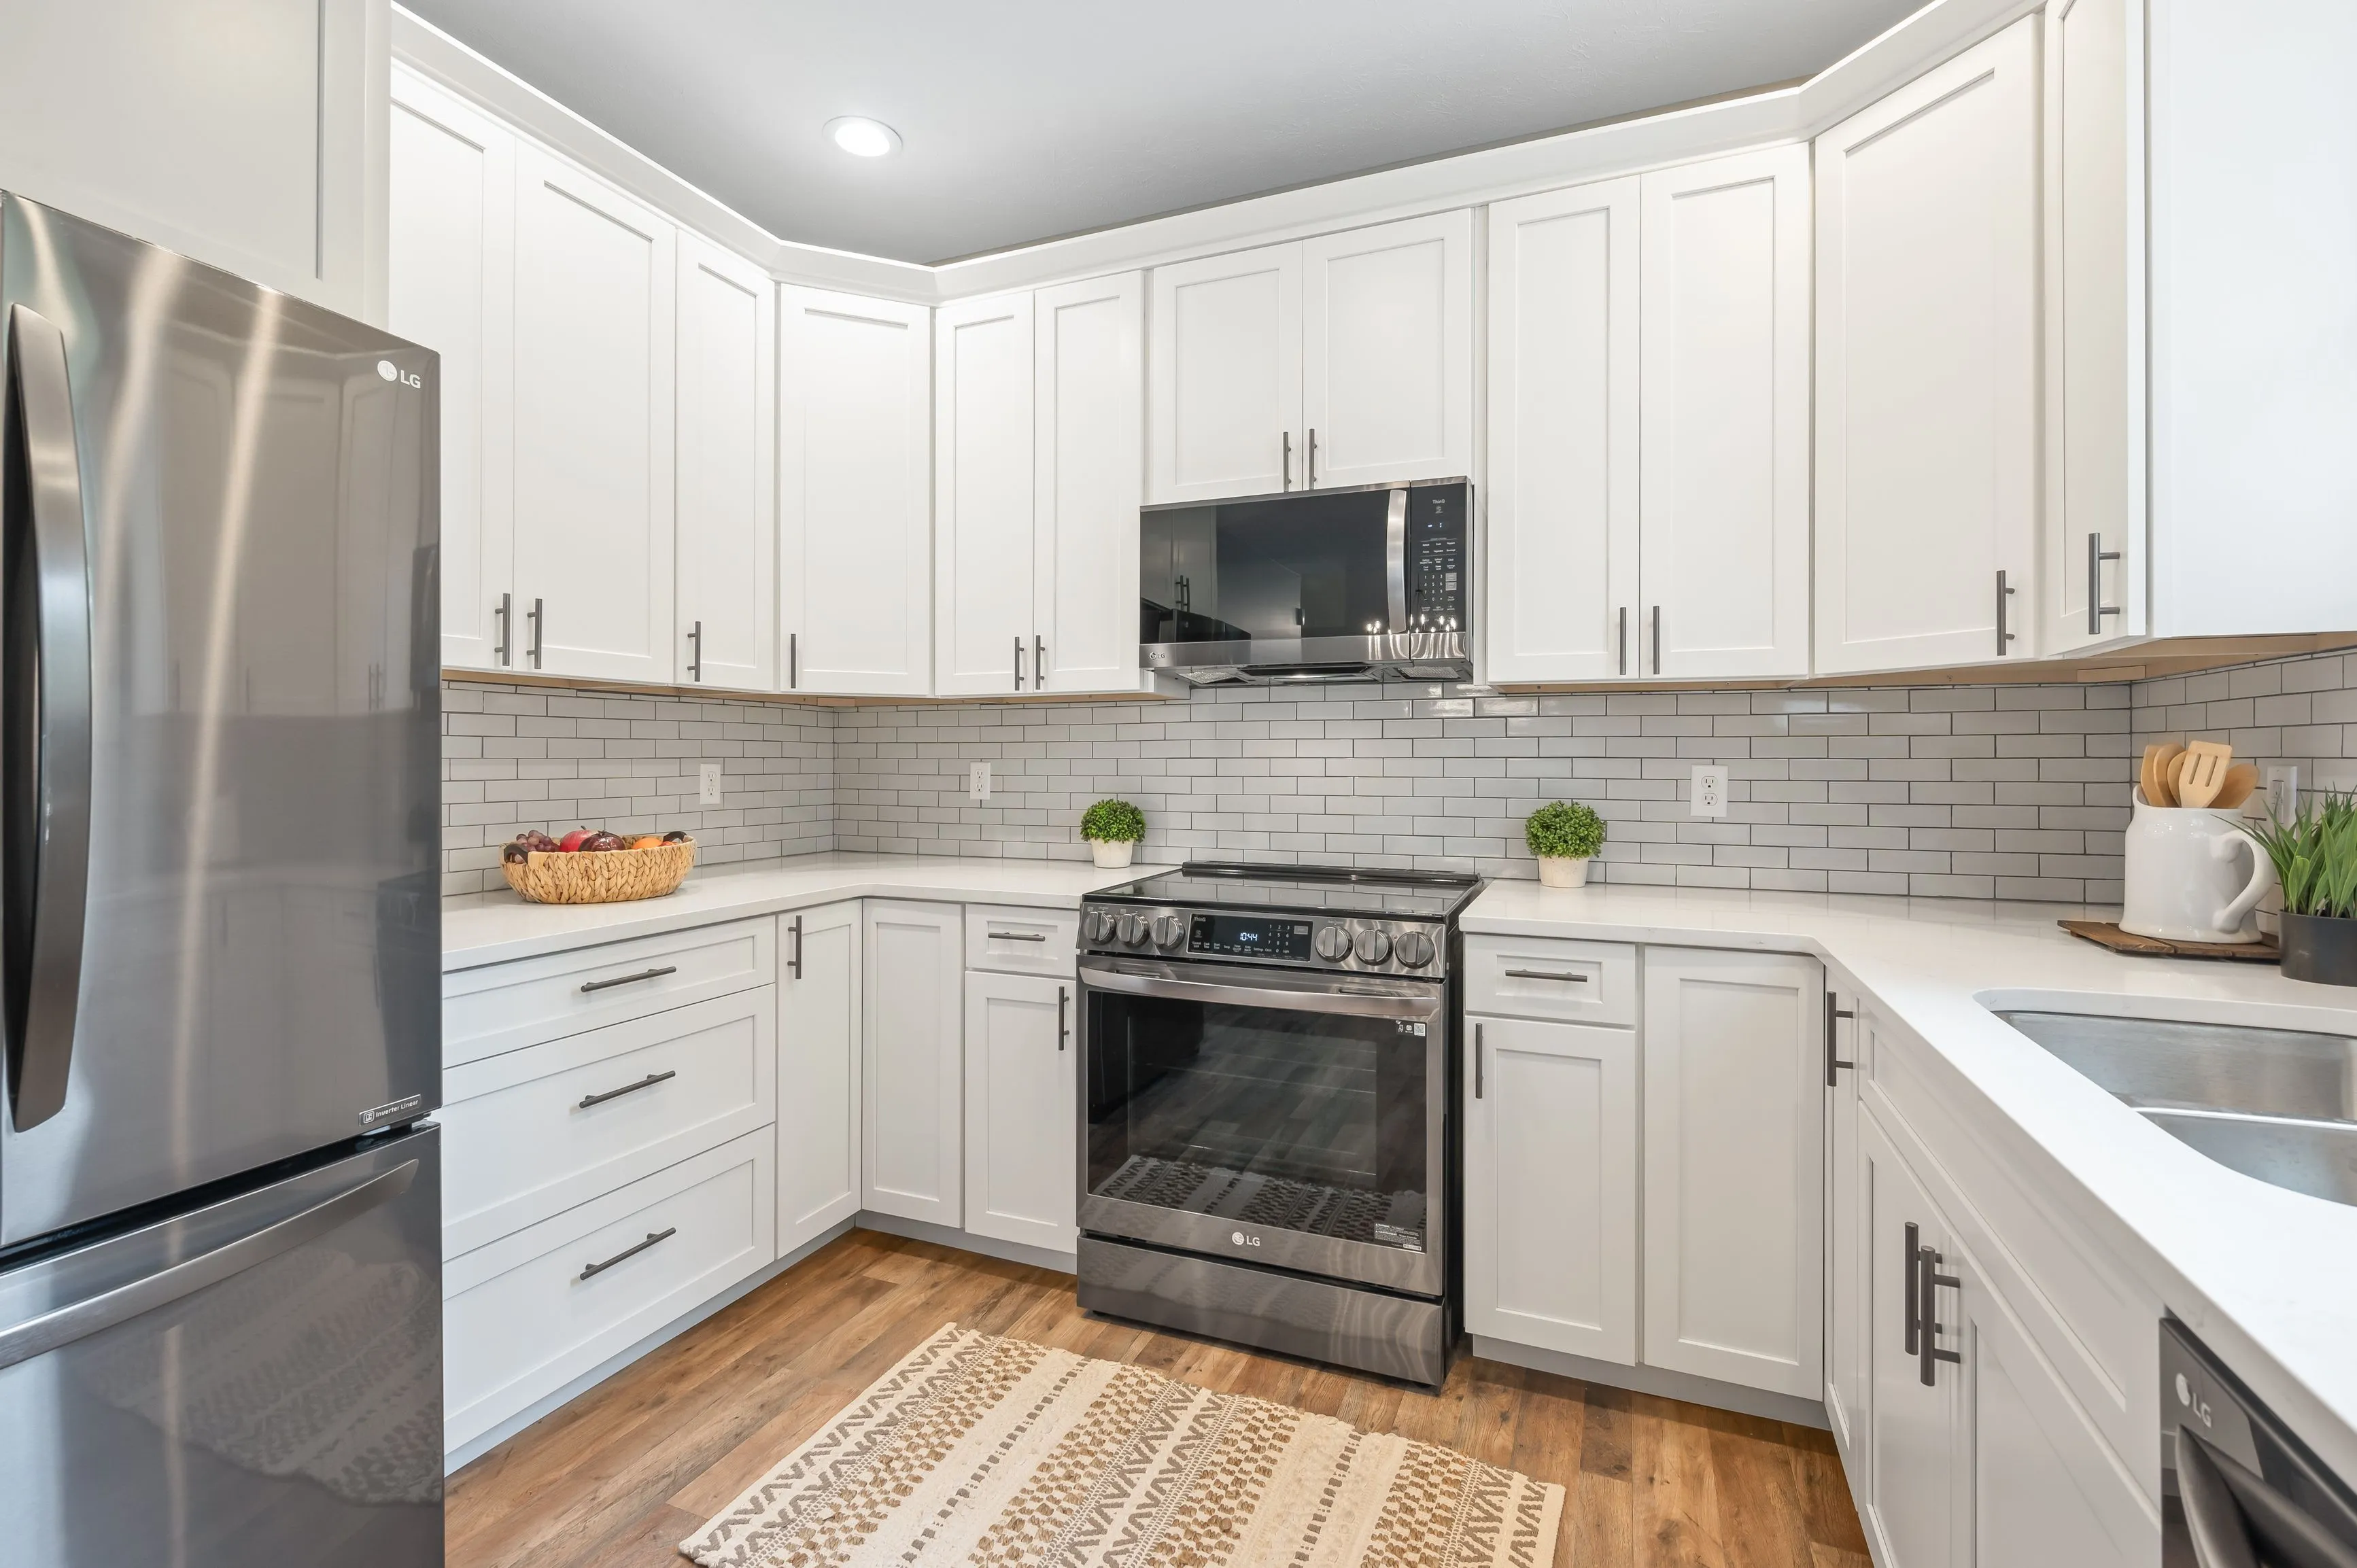 Modern kitchen interior with white cabinetry, stainless steel appliances, subway tile backsplash, and a patterned beige rug on wooden flooring.